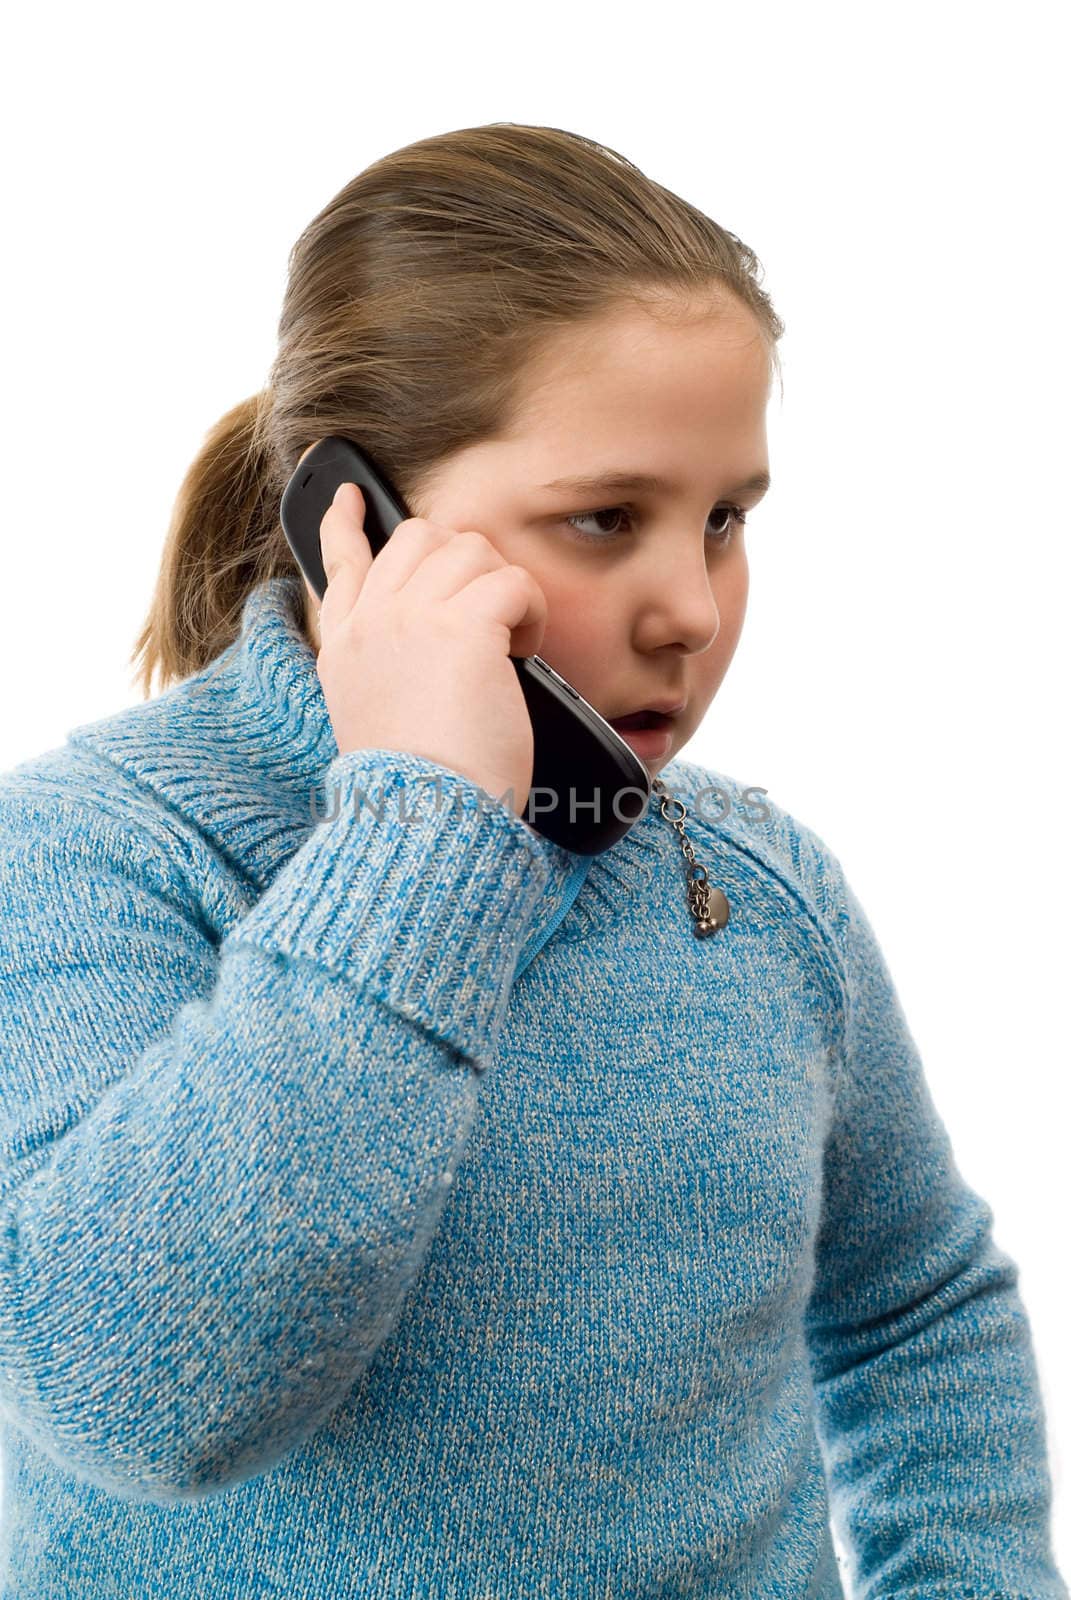 A young girl having a serious conversation on a cell phone, isolated against a white background